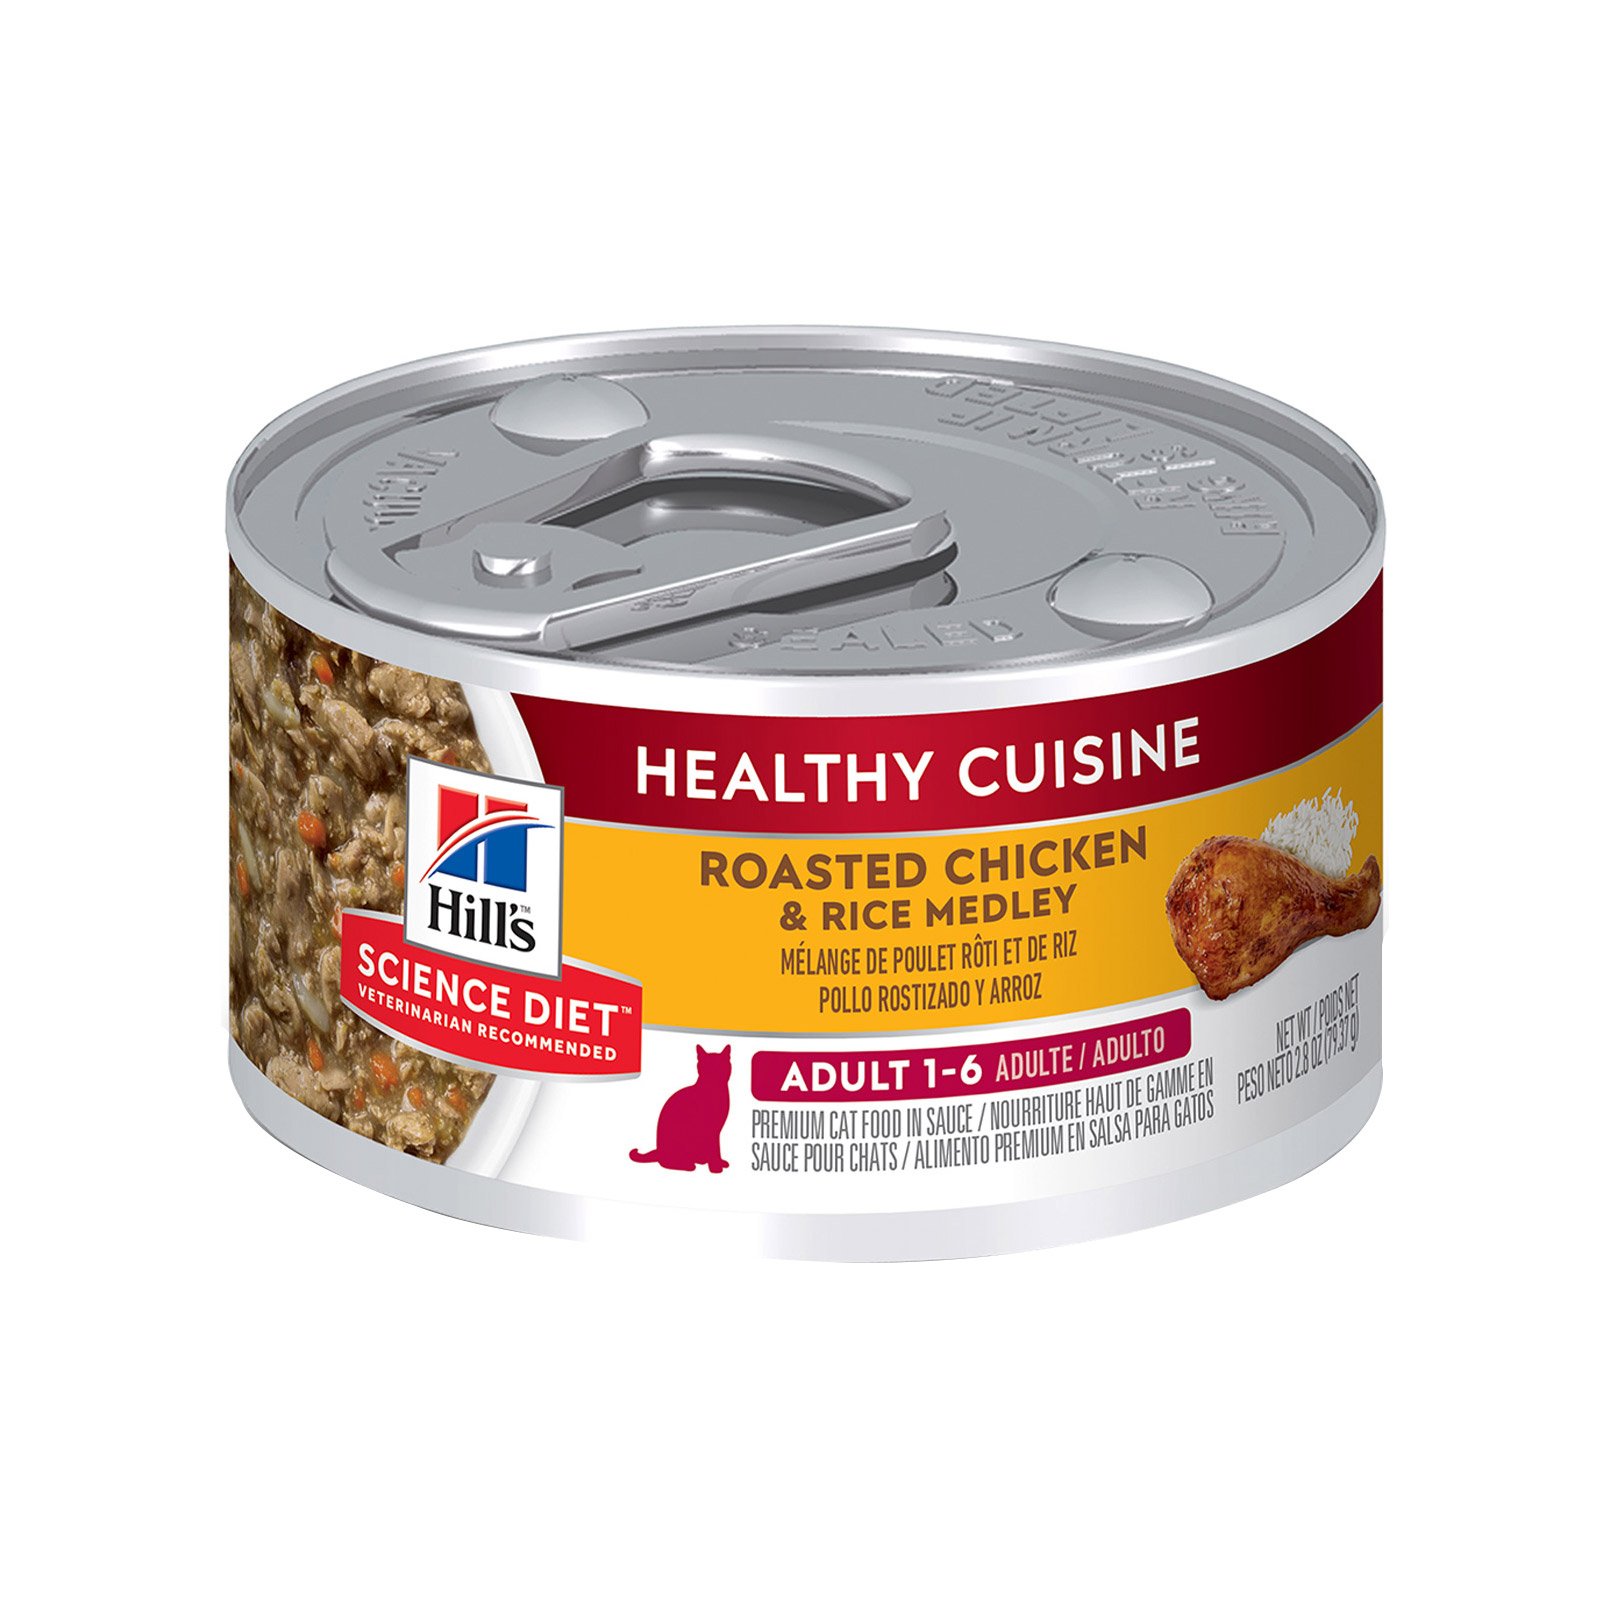 Hill’s Science Diet Adult Healthy Cuisine Roasted Chicken & Rice Medley Canned Cat Food